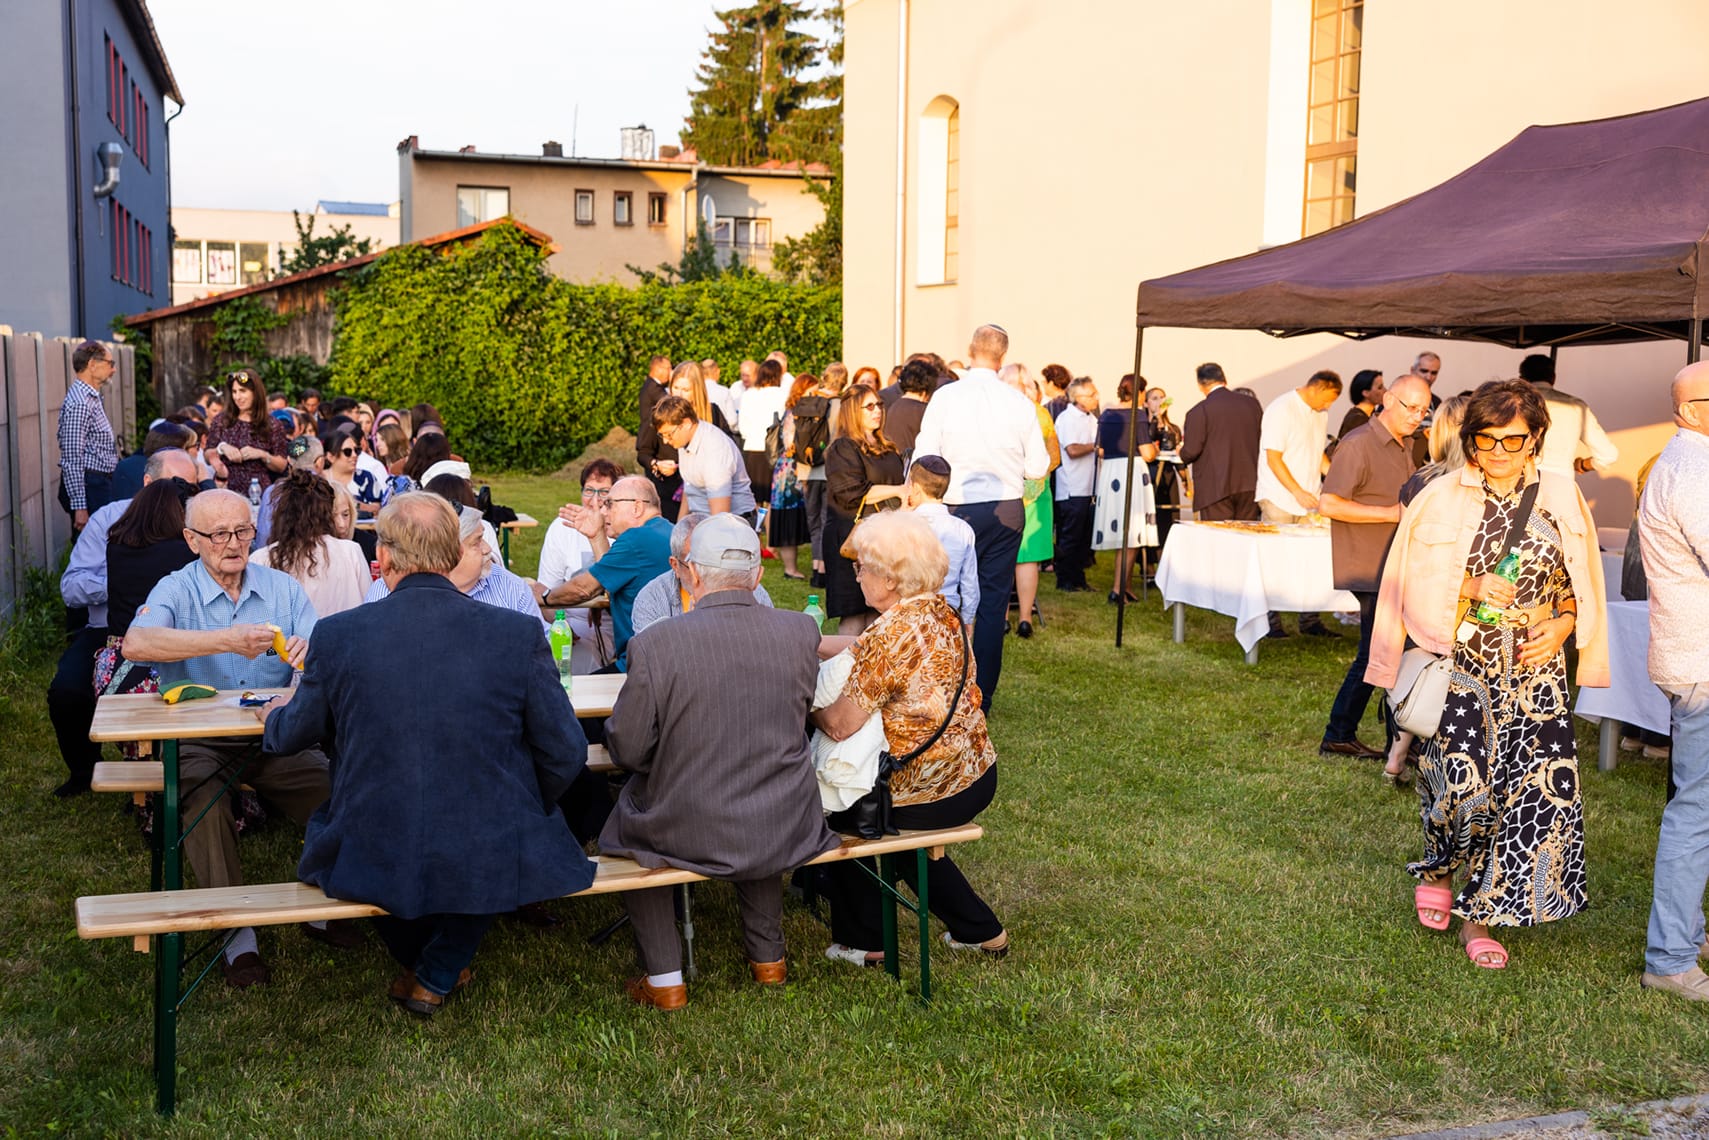 After the ceremony in the Memorial, guests were invited to a reception in the suburbia yard.